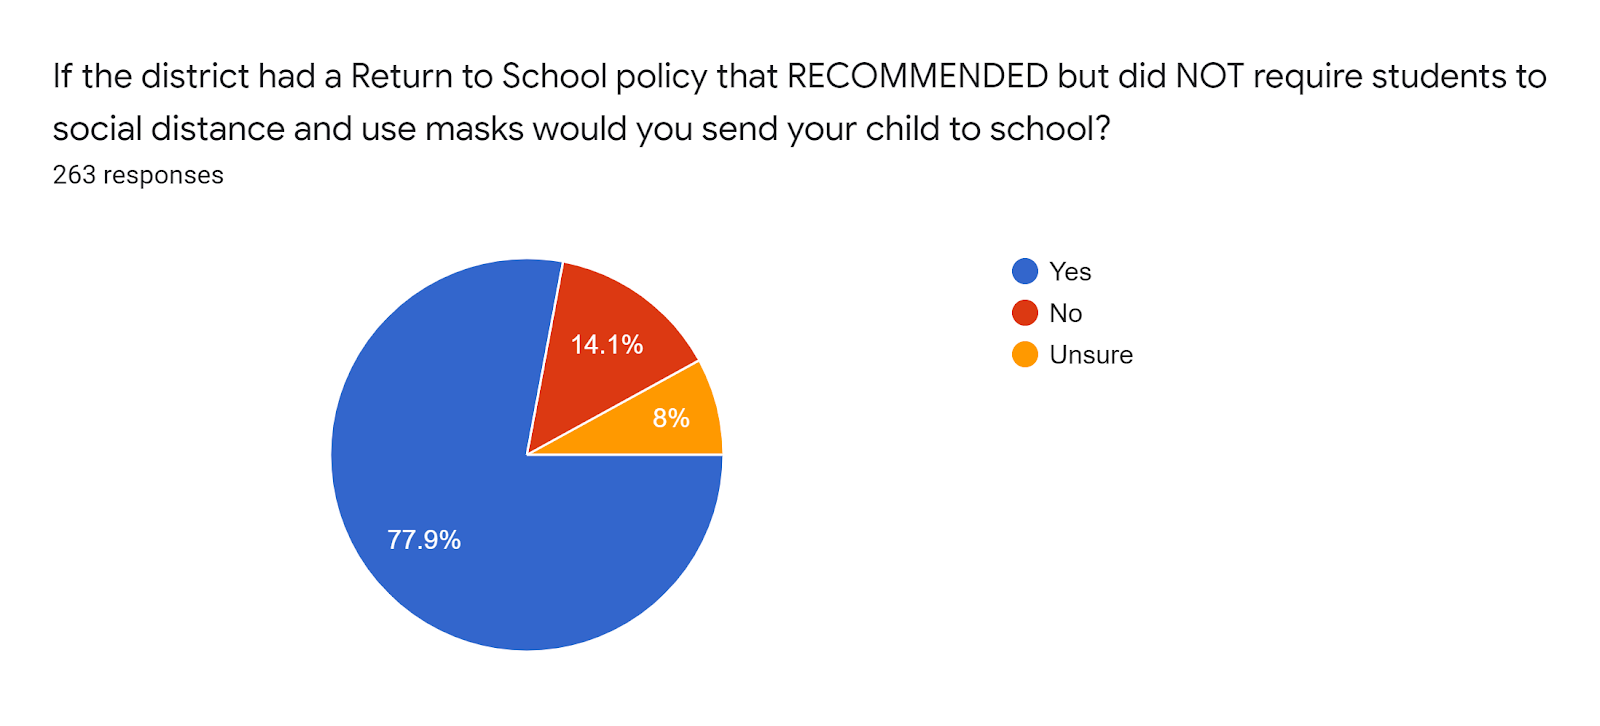 Forms response chart. Question title: If the district had a Return to School policy that RECOMMENDED but did NOT require students to social distance and use masks would you send your child to school?. Number of responses: 263 responses.